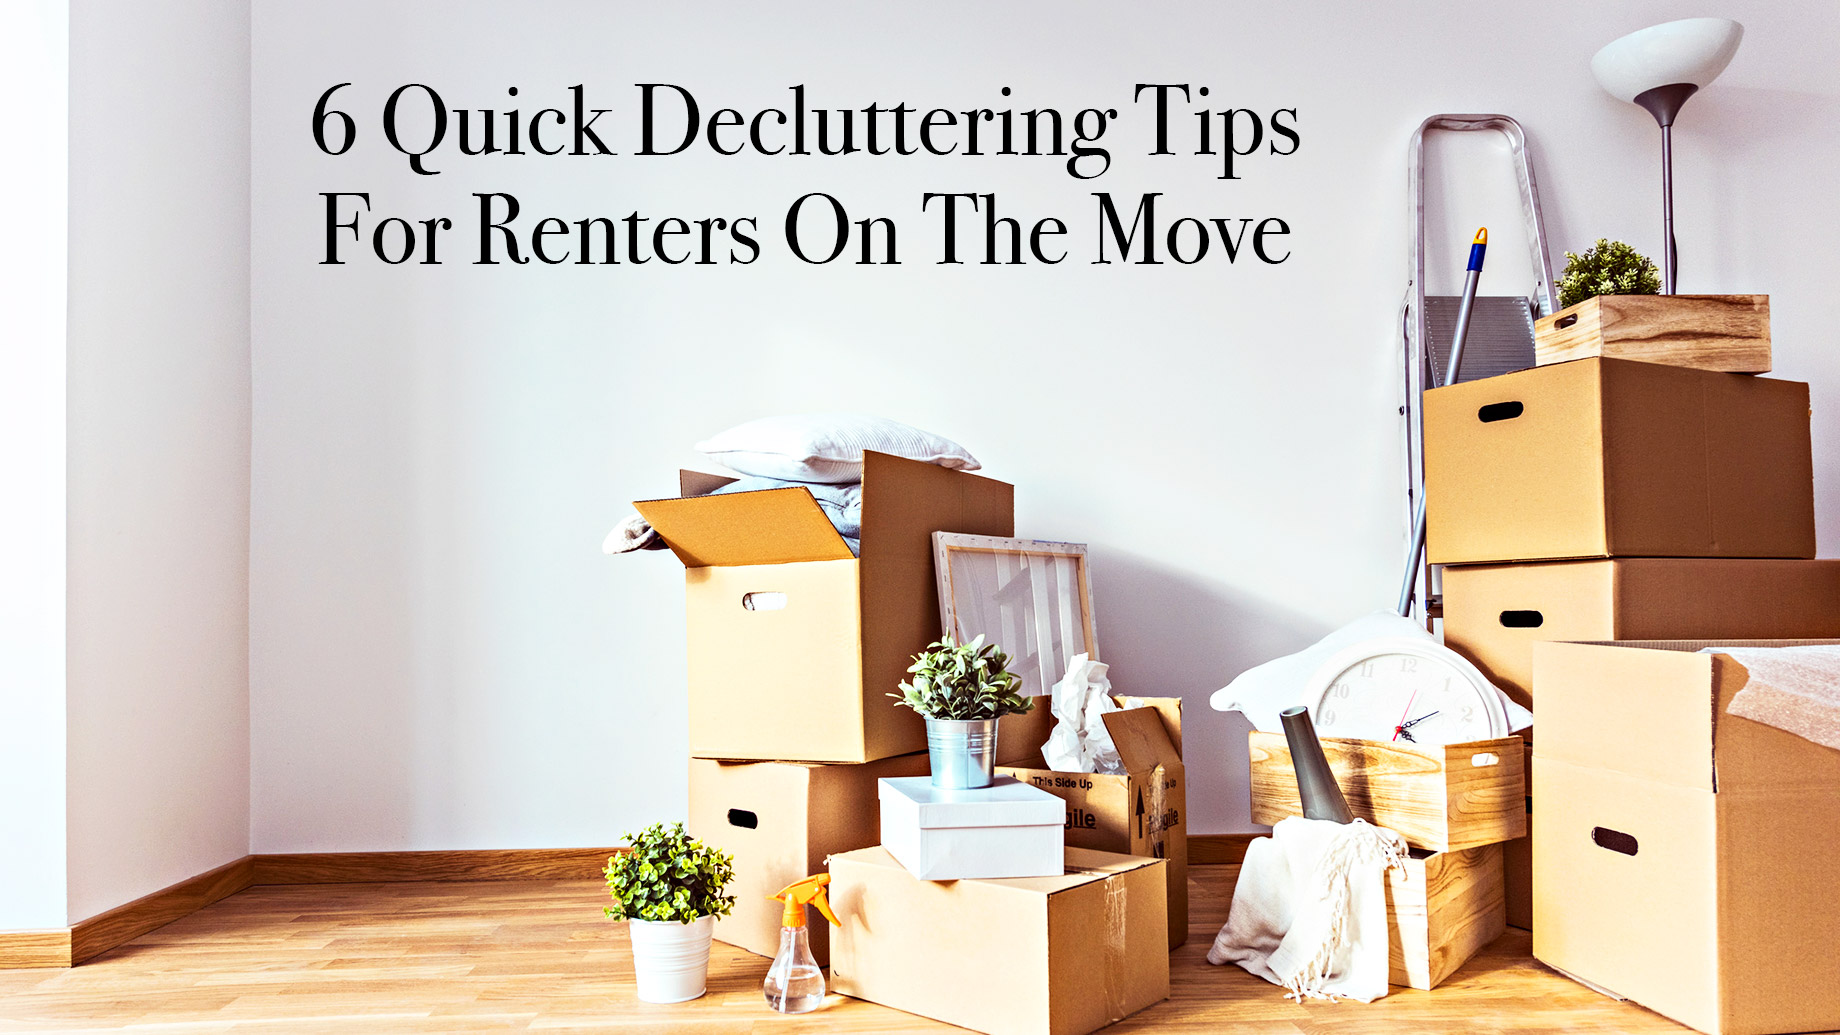 6 Quick Decluttering Tips For Renters On The Move